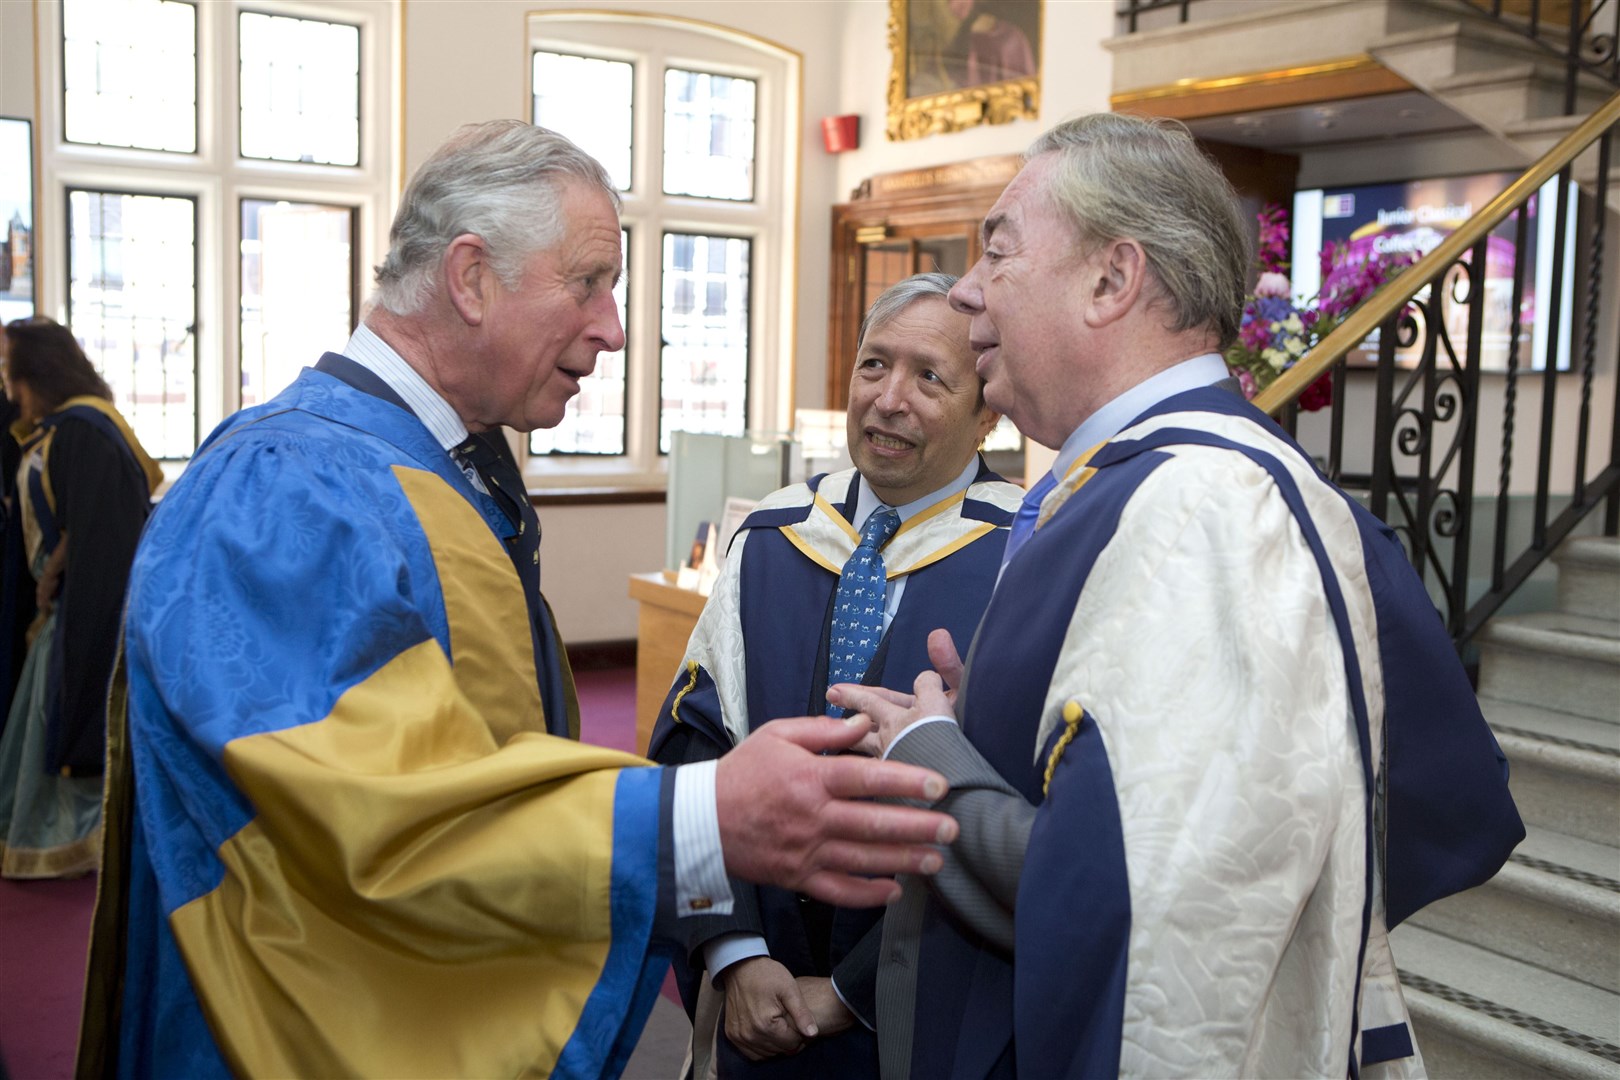 The Prince of Wales with Lord Lloyd Webber (Heathcliff O’Malley/Daily Telegraph/PA)